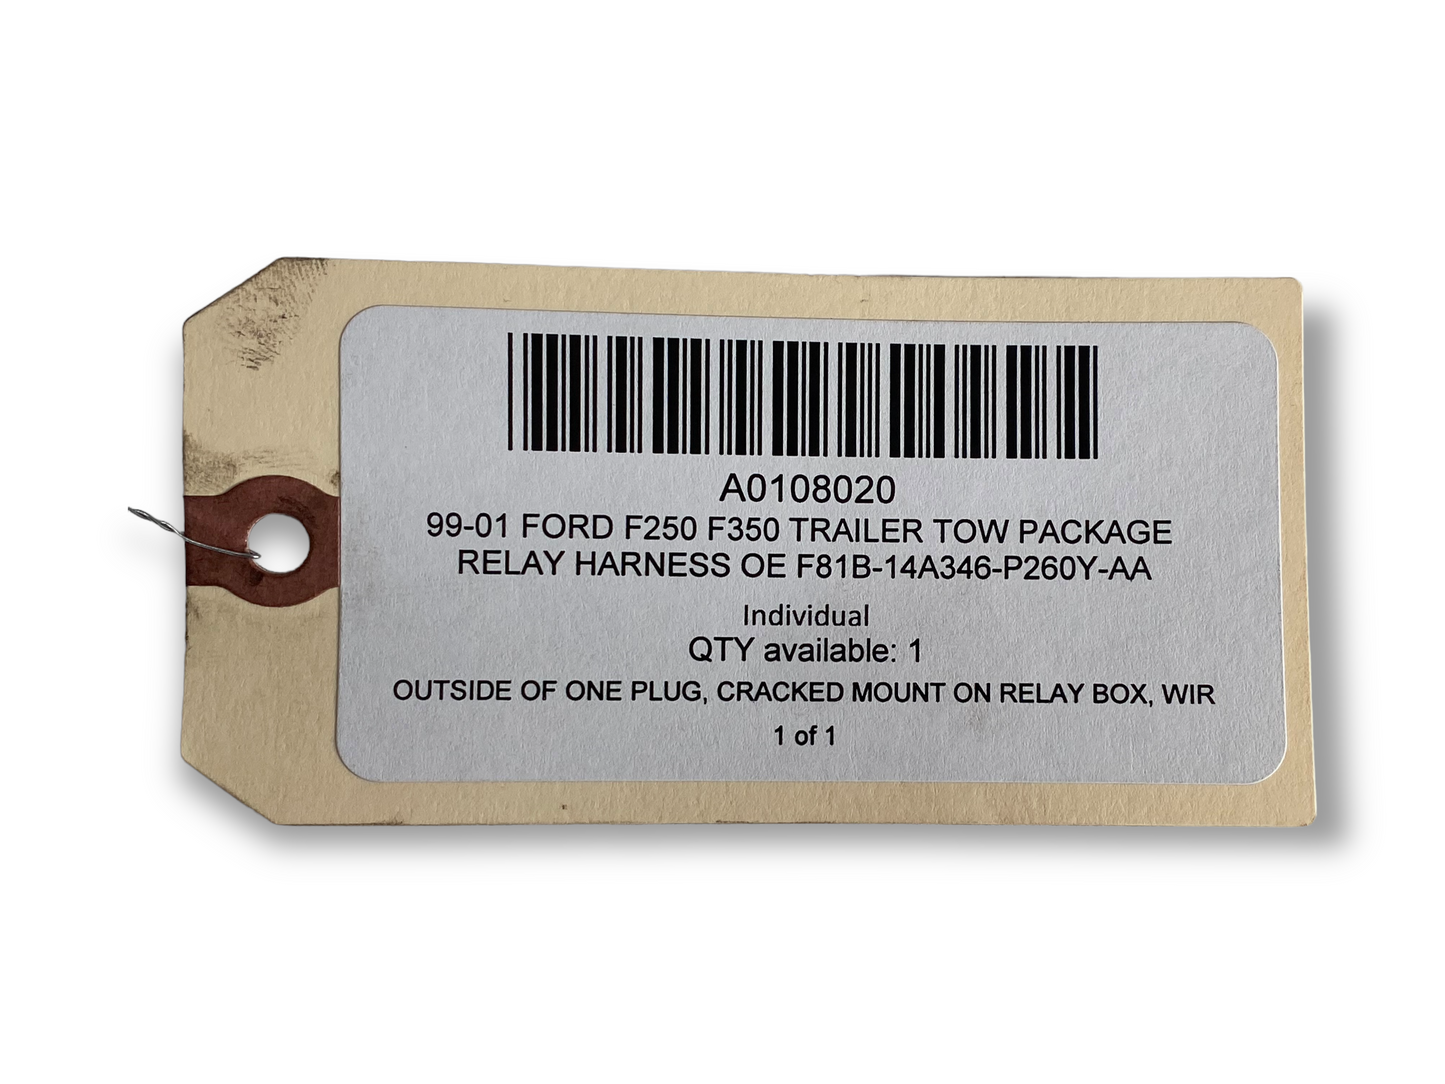 99-01 Ford F250 F350 Trailer Tow Package Relay Harness OE F81B-14A346-P260Y-AA